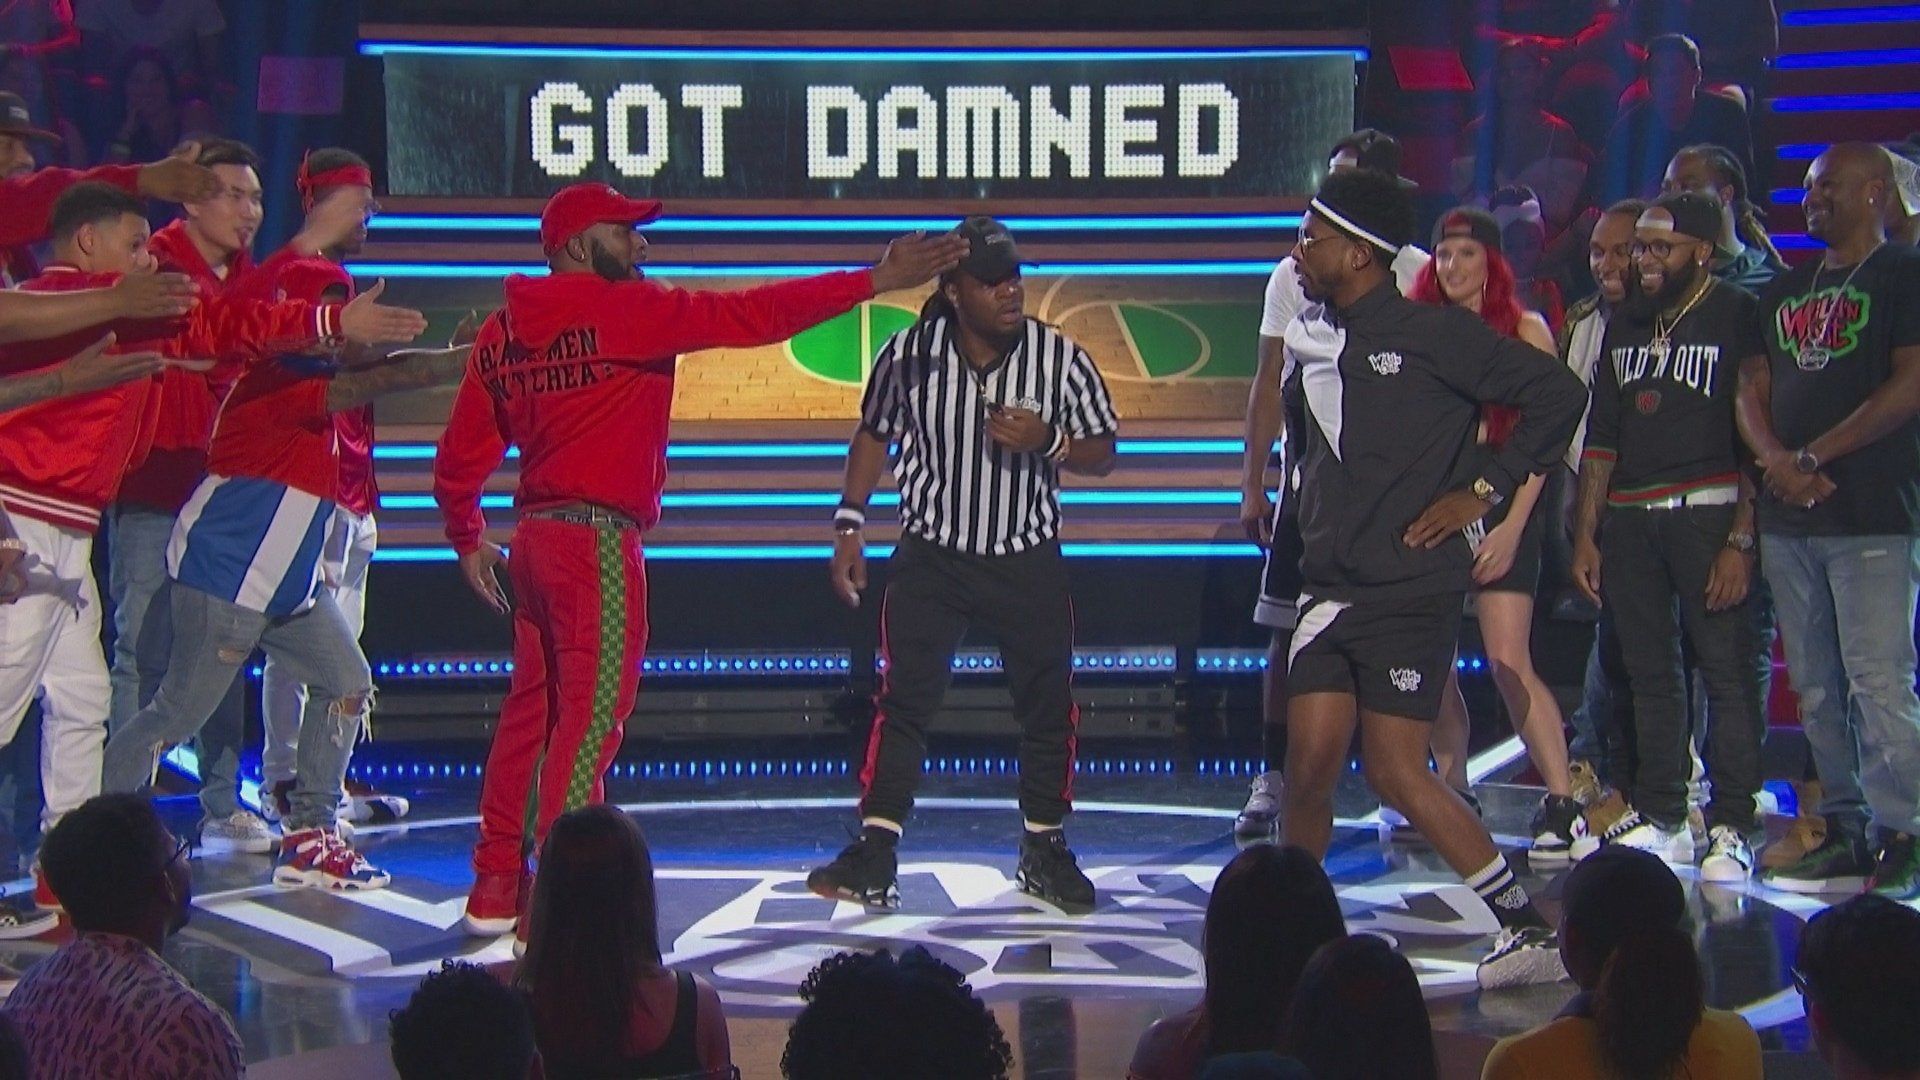 Wild N Out Wallpaper